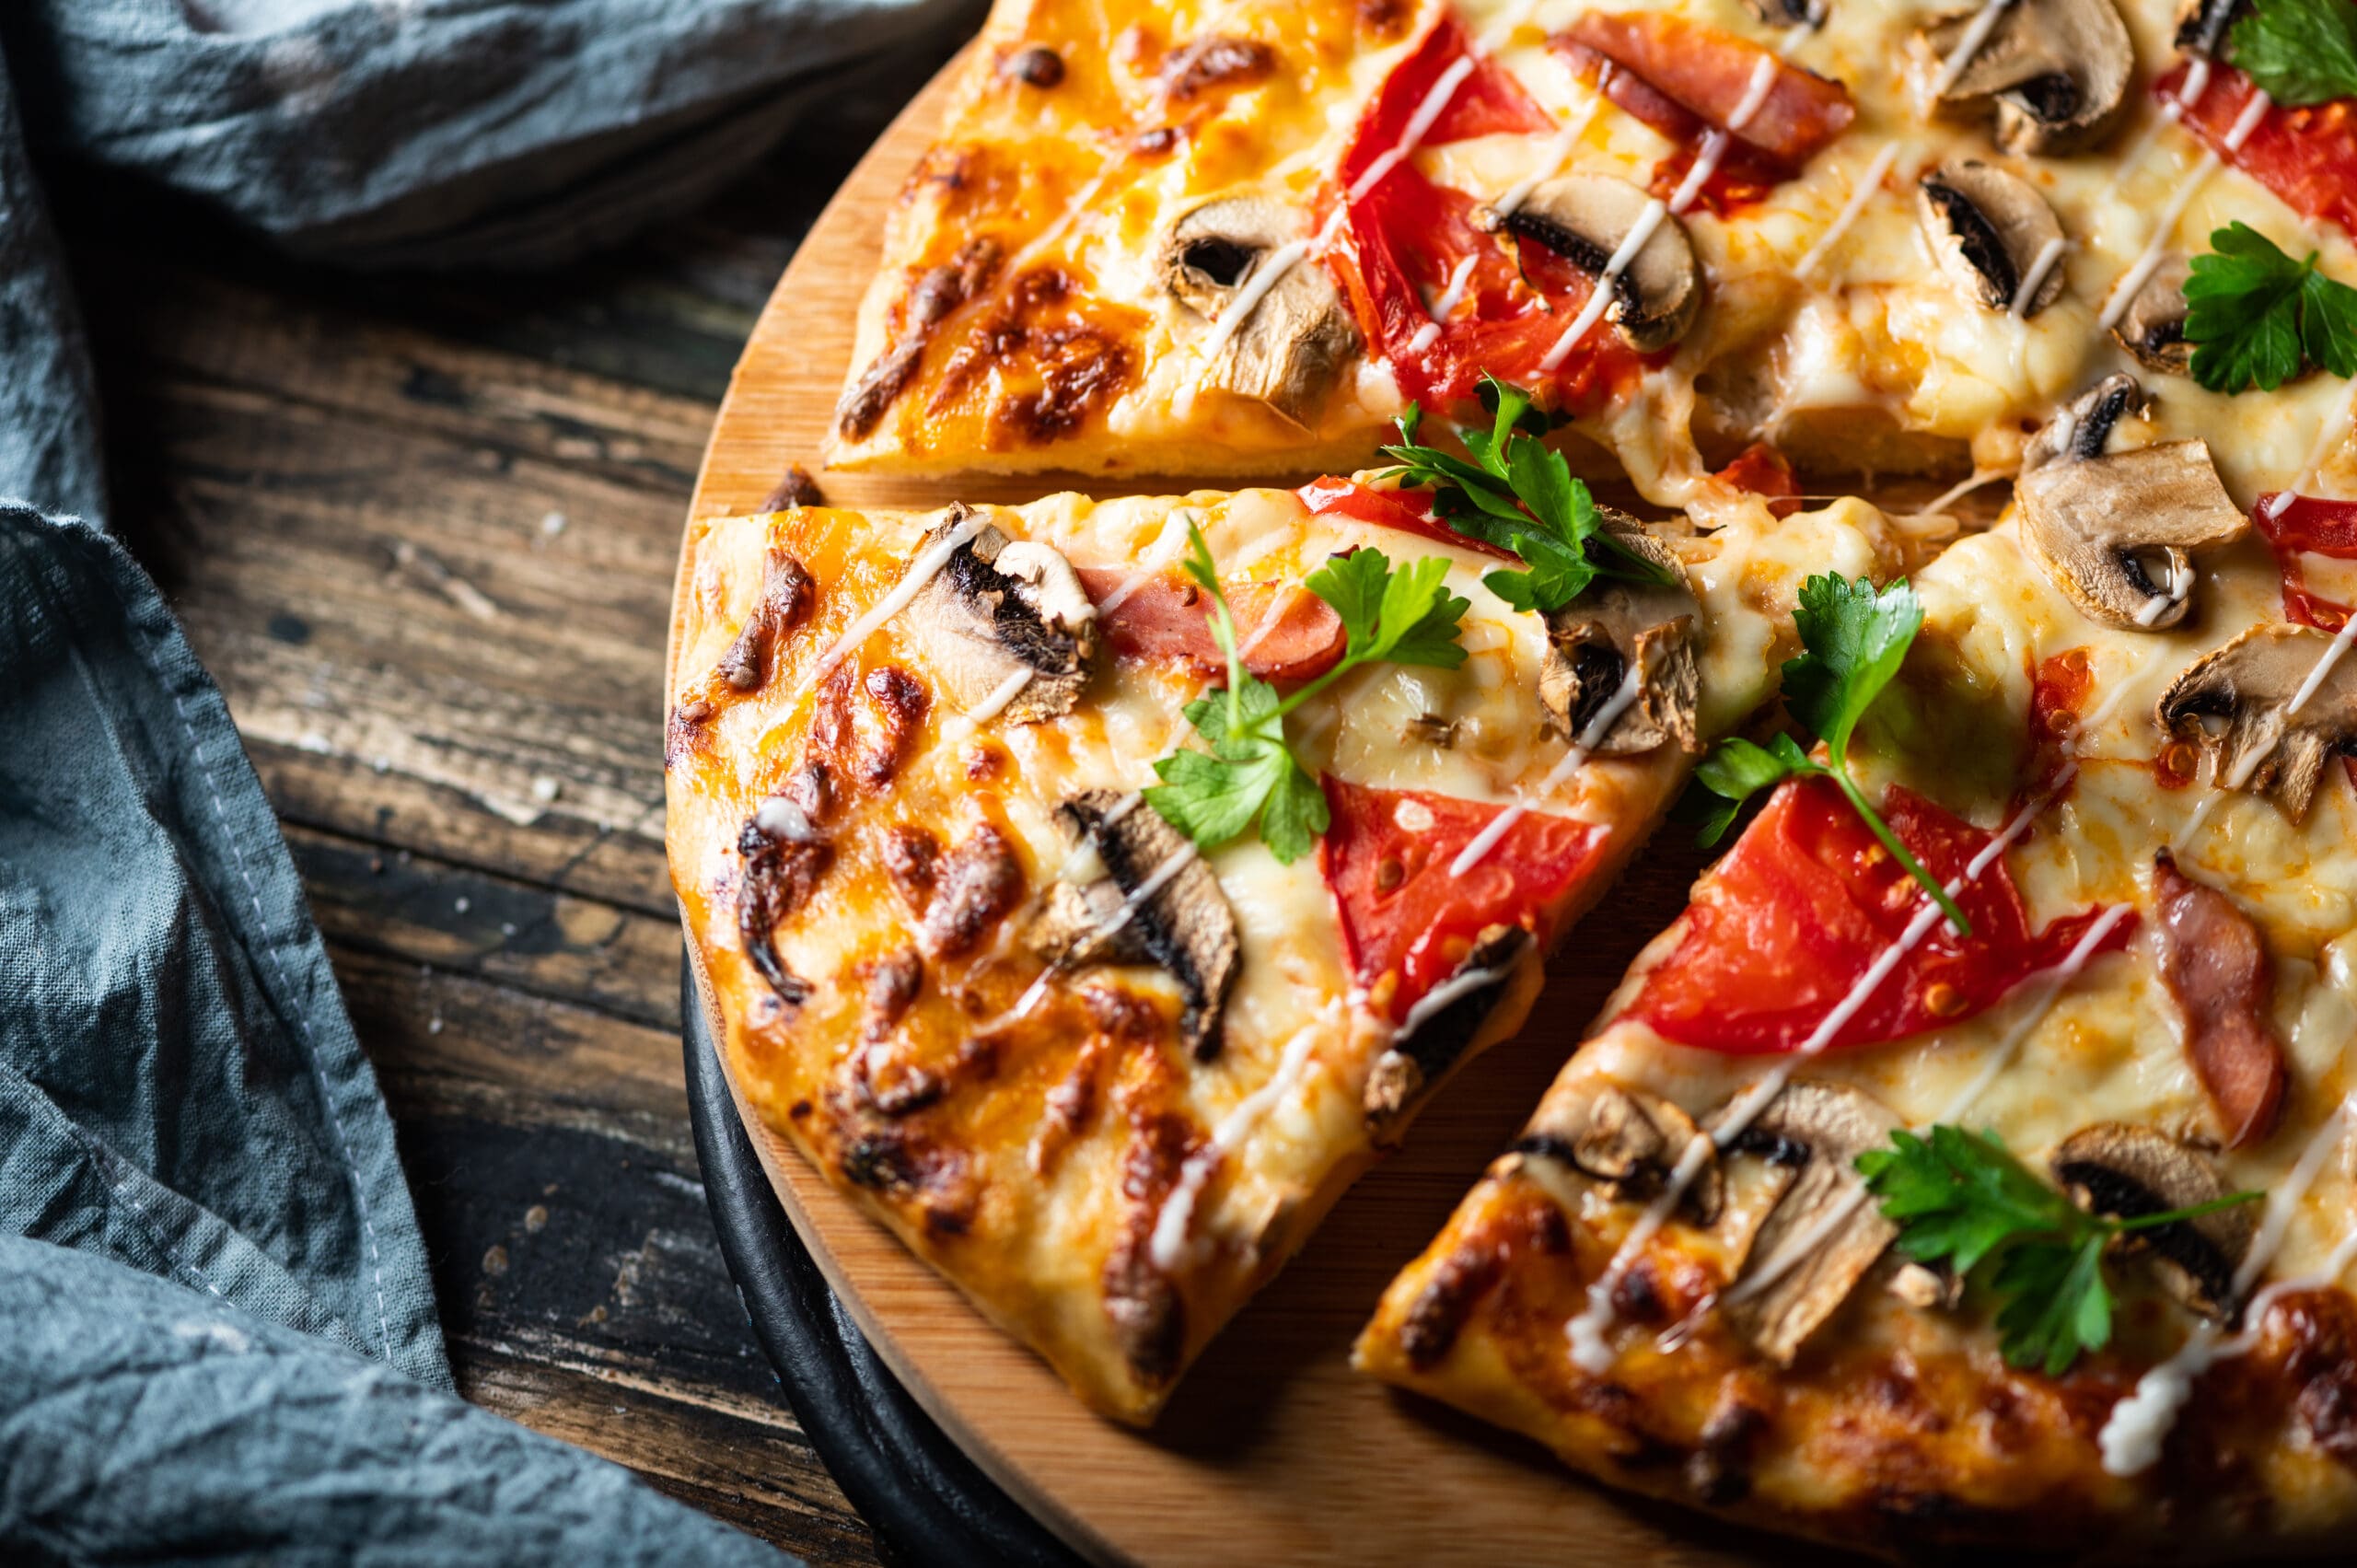 The Best Pizza Restaurant in Texas | Mogio’s Gourmet PizzaThe Best Pizza Restaurant in Texas | Mogio’s Gourmet Pizza